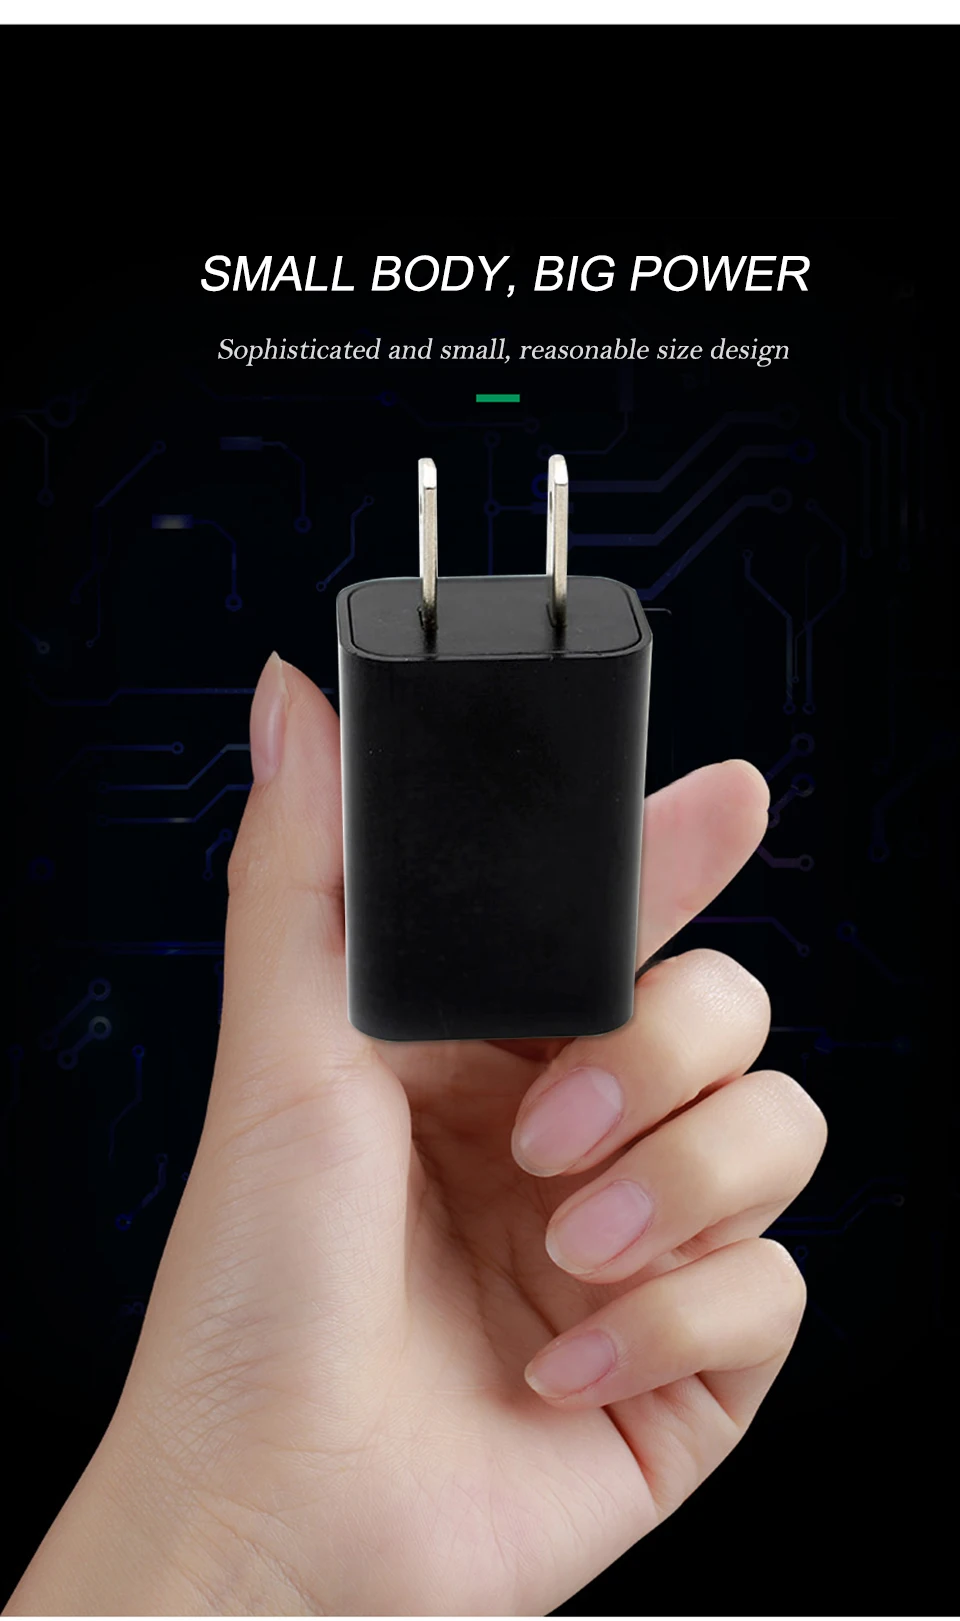 Mobile Phone Charger 5V1A USB Travel Charger Portable Wall Adapter EU US Plug BlackWhite For iPhone iPad Samsung Xiaomi Phone (7)